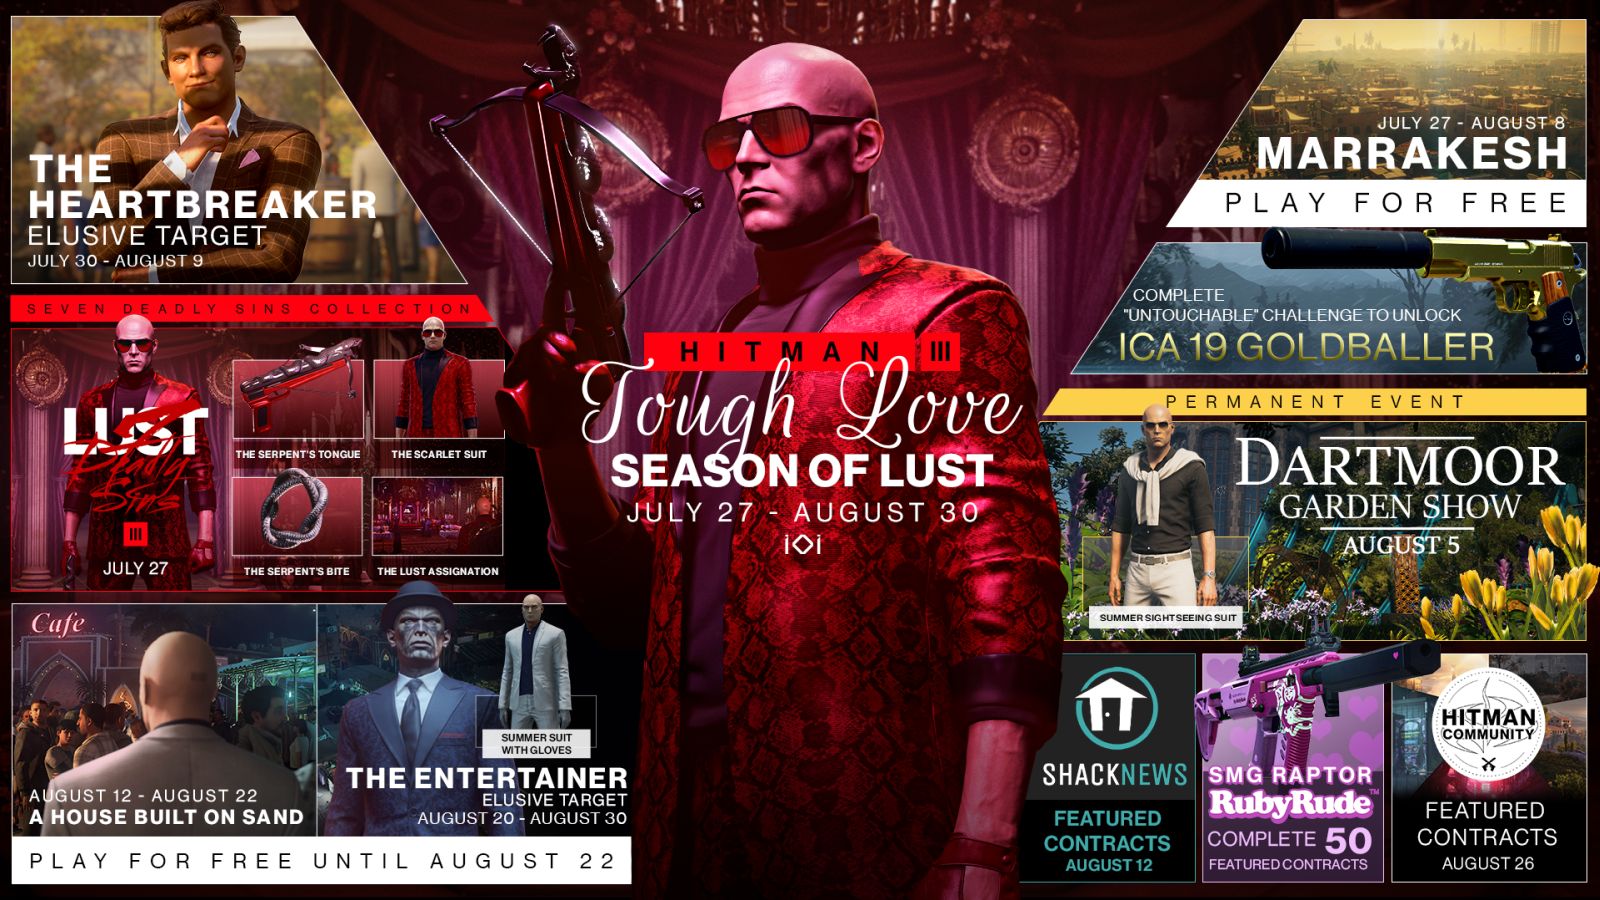 A question of lust IOI details Hitman 3’s newest DLC, Season of Lust